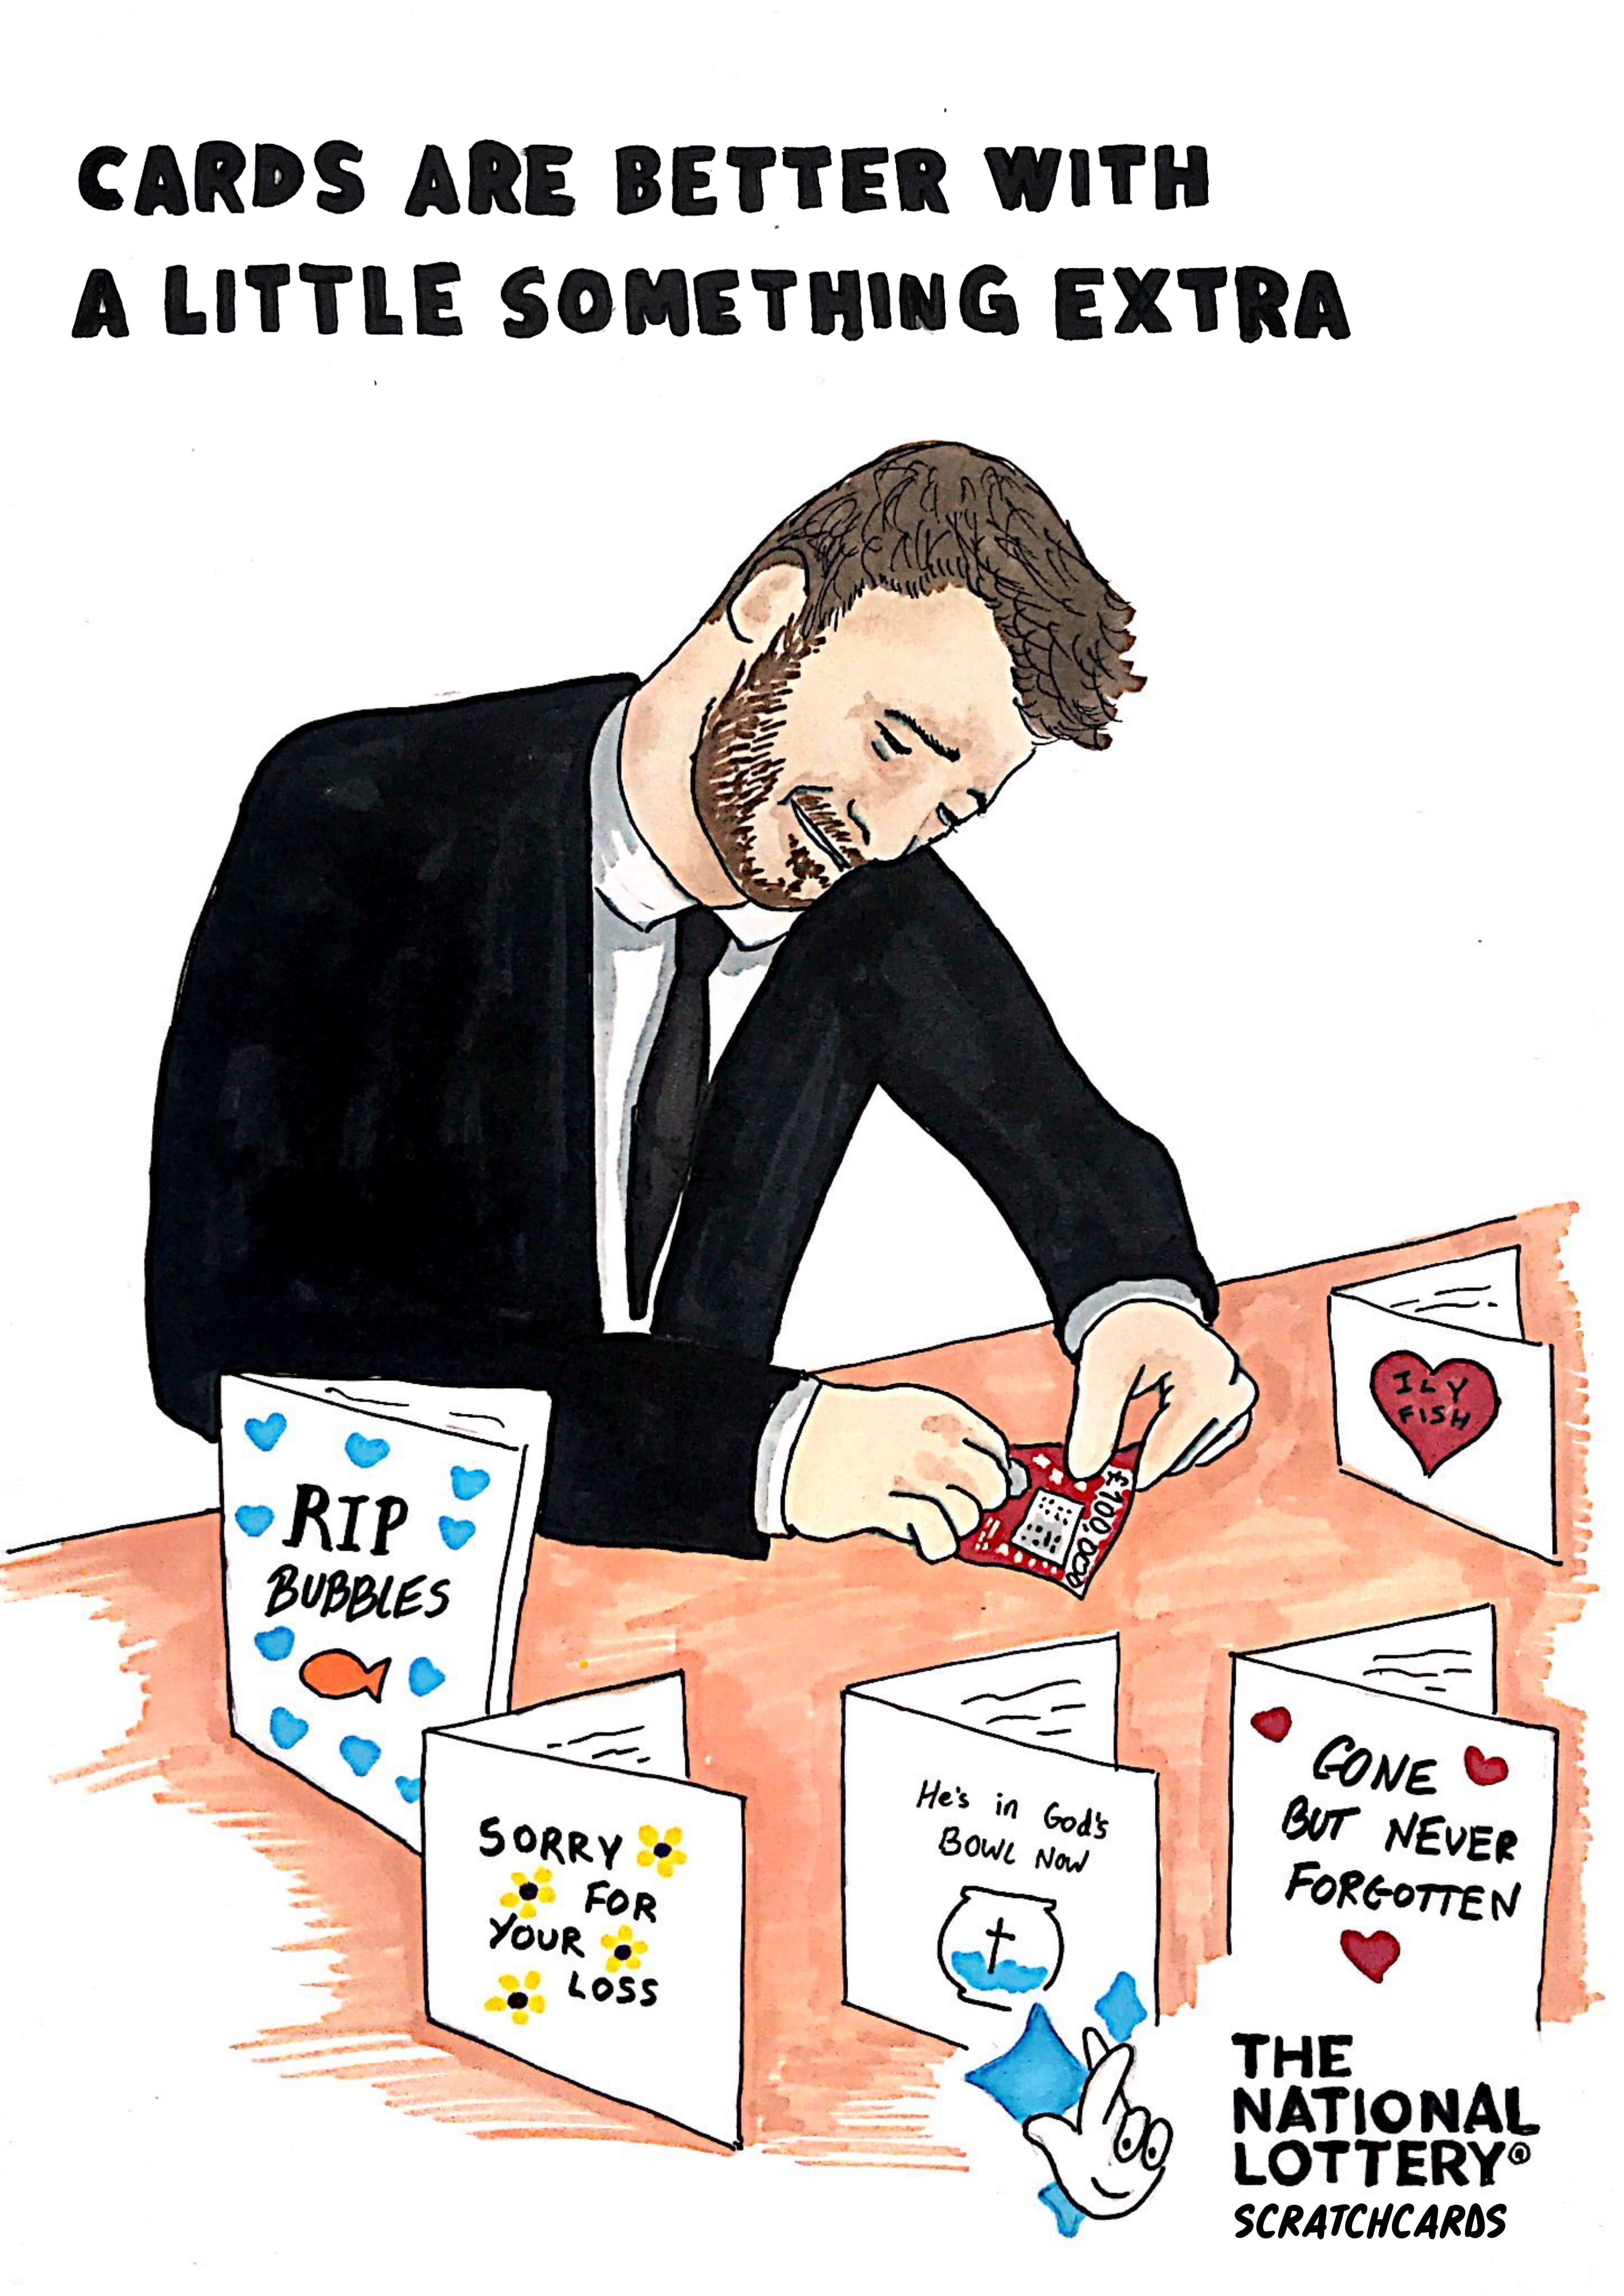 Illustration of a man scratching a scratchcard surrounded with condolence cards.